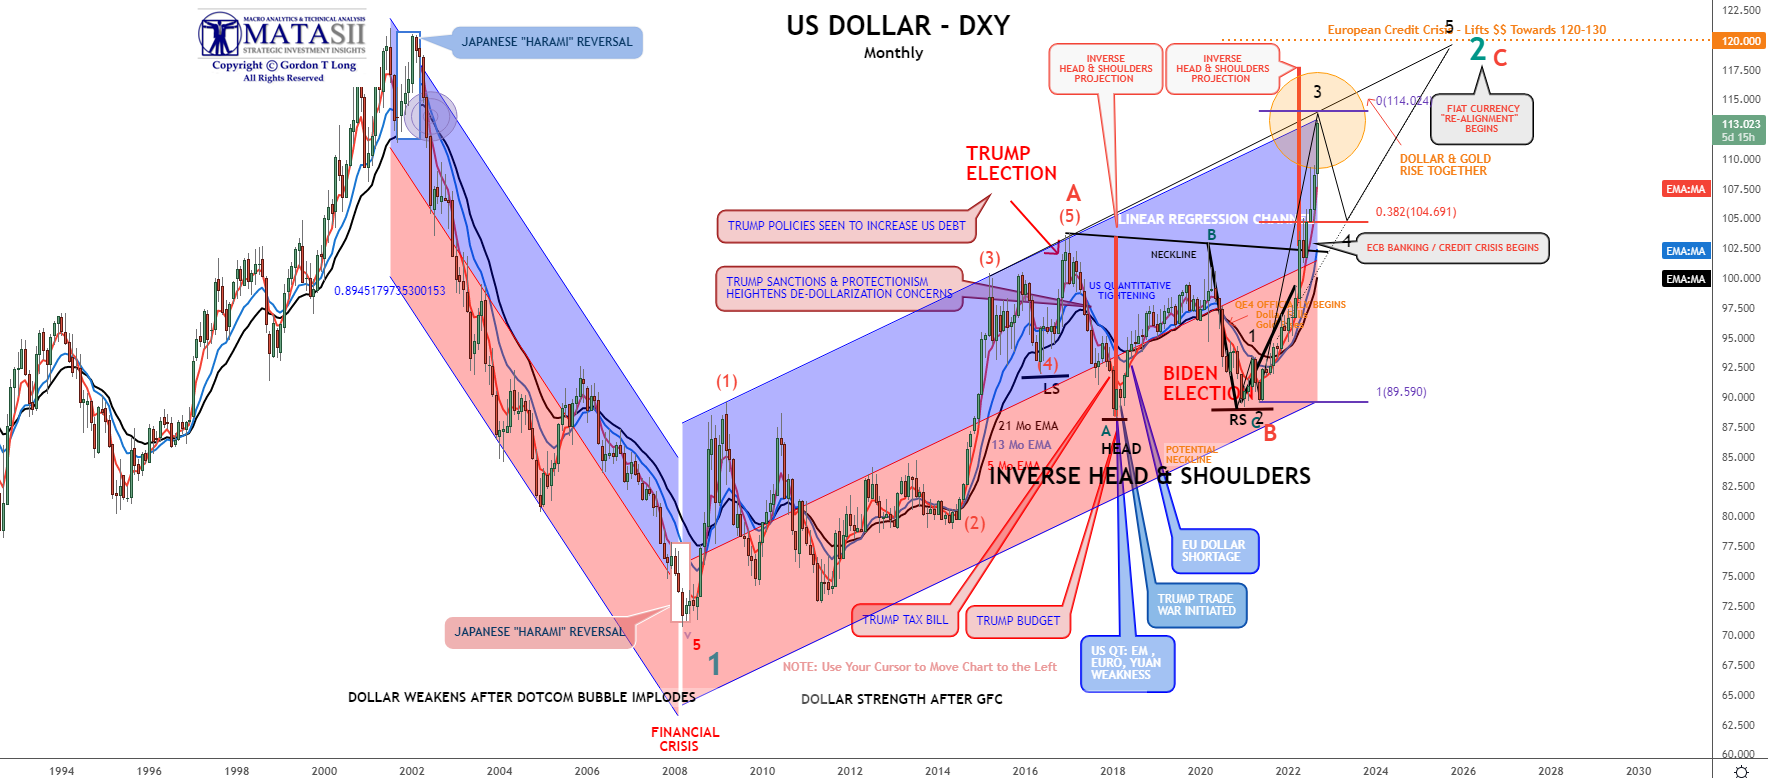 UnderTheLens-09-21-22-OCTOBER-Global-Problems-China-Japan-EU-Newsletter-2-DXY-1 image